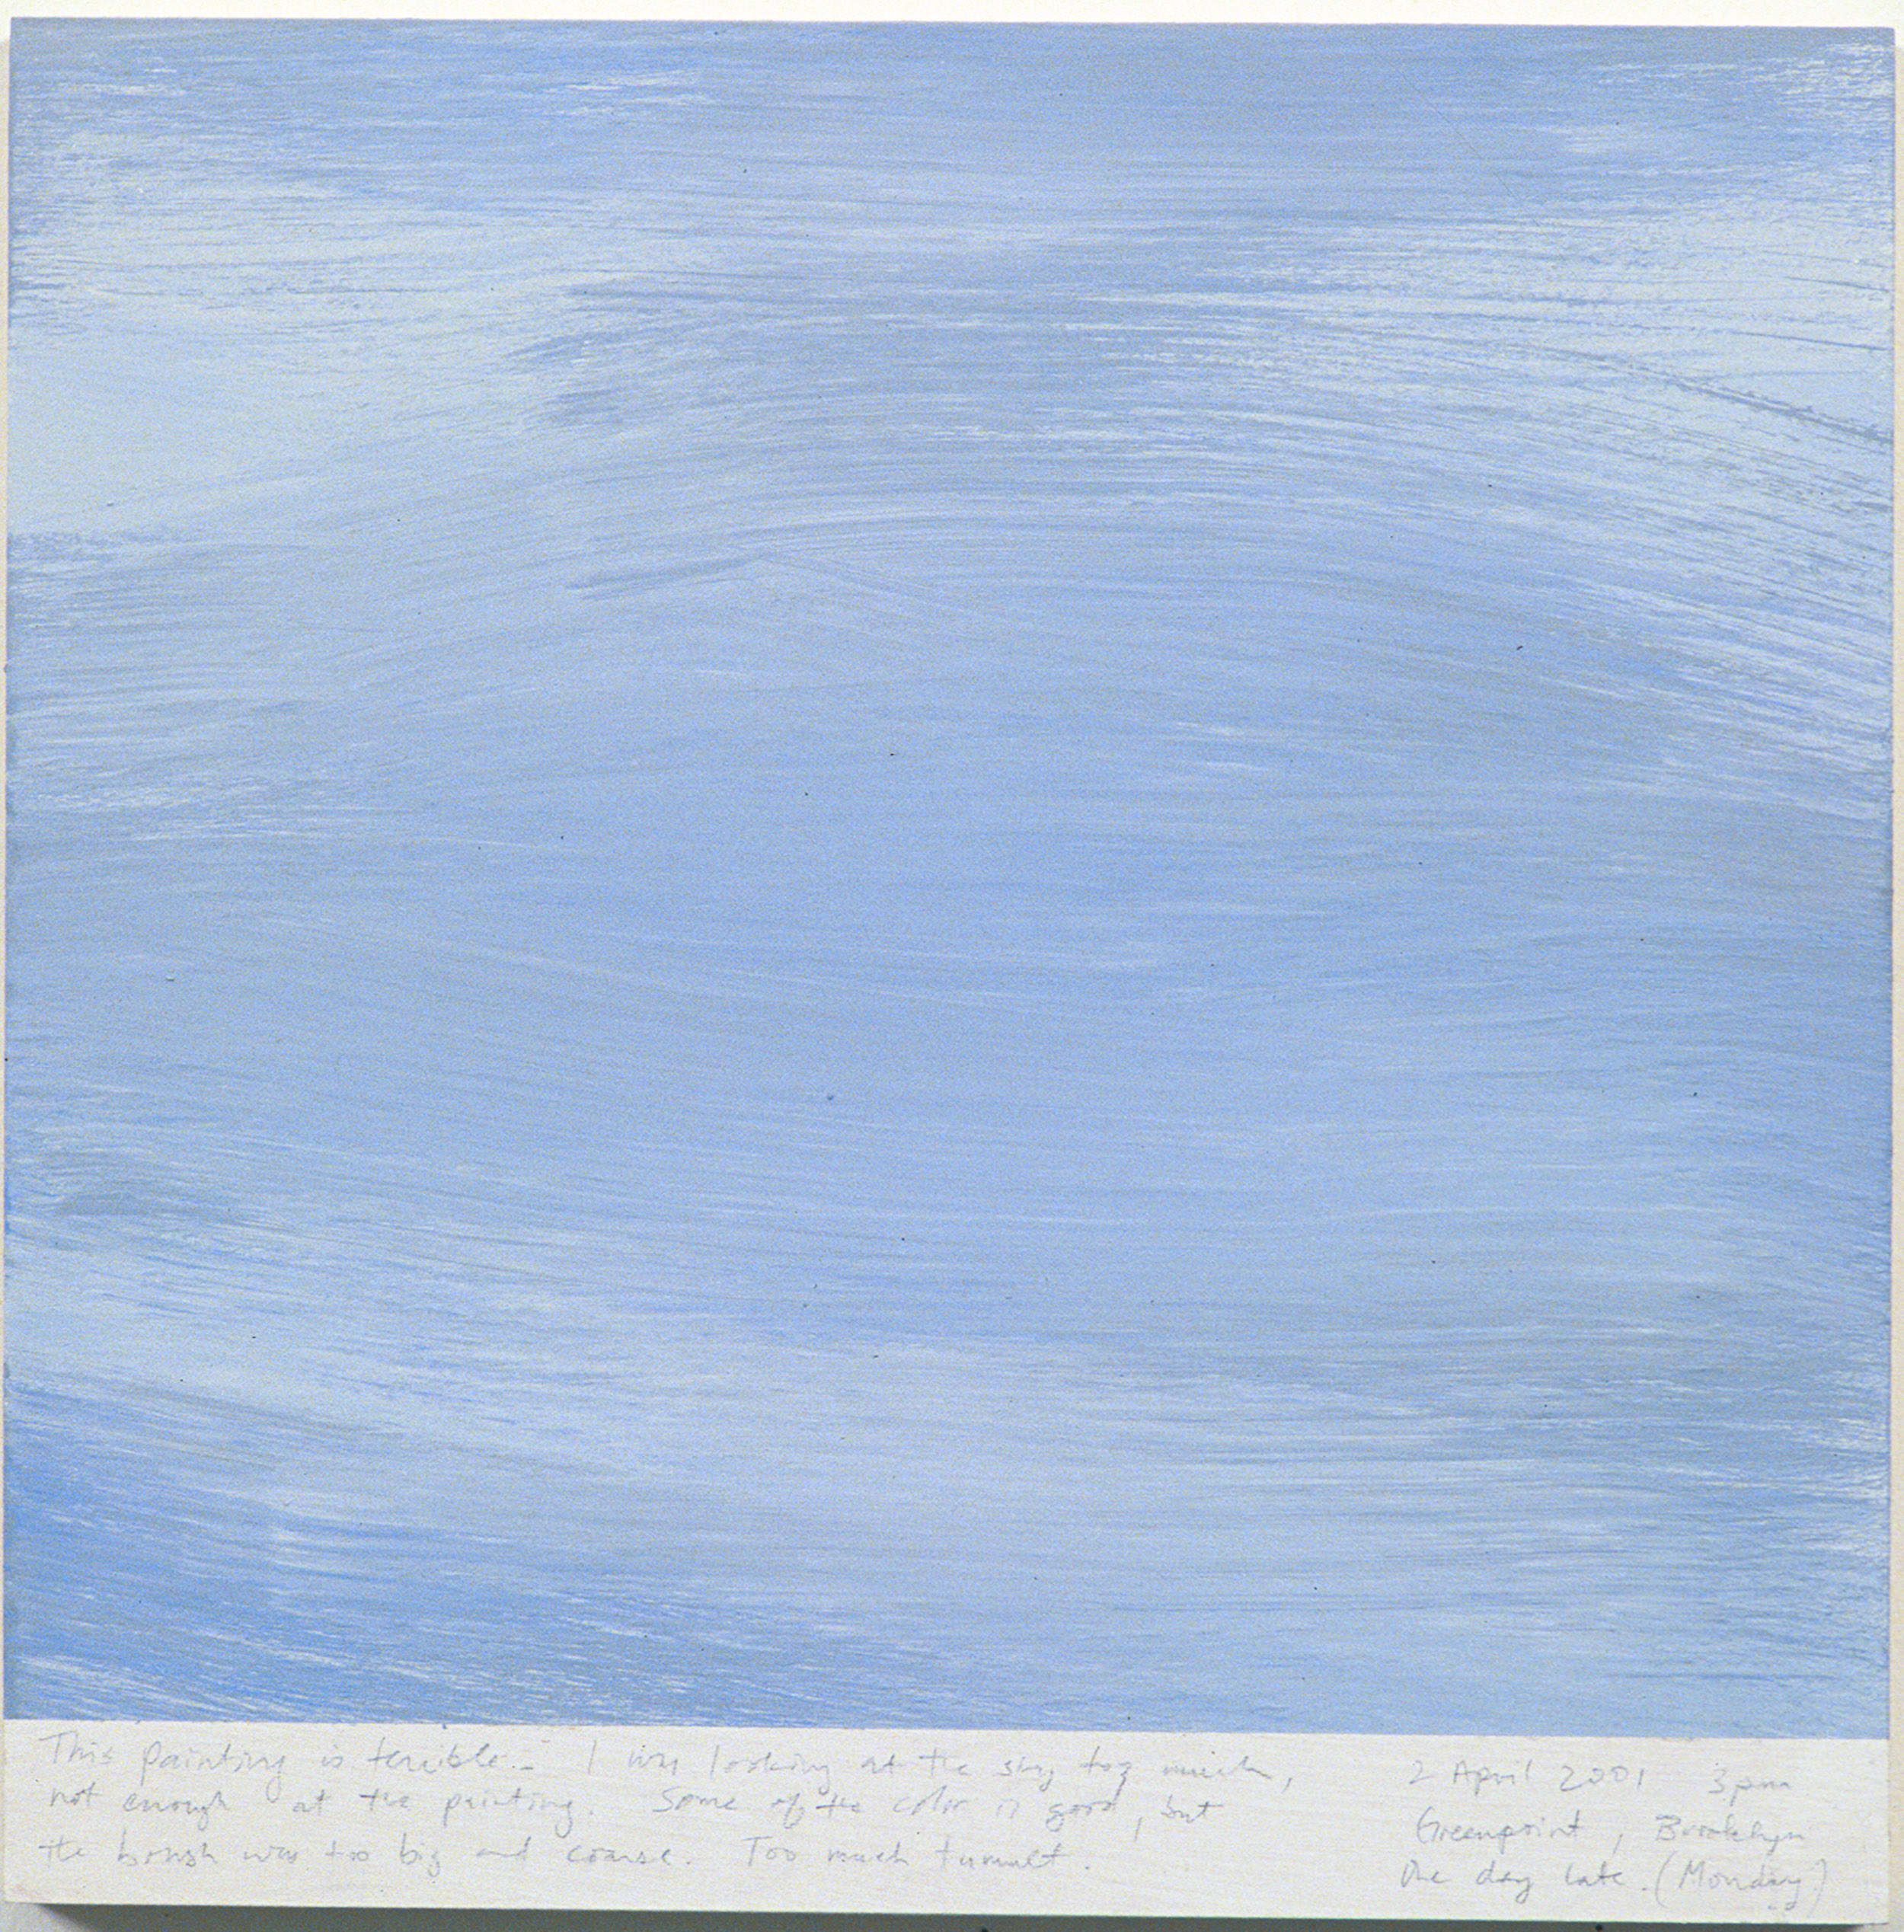 A 14 × 14 inch, acrylic painting of the sky. A journal entry is handwritten on the painting:

“This painting is terrible. I was looking at the sky too much, not enough at the painting. Some of the color is good, but the brush was too big and coarse. Too much tumult.

2 April 2001 3 pm
Greenpoint, Brooklyn
One day late (Monday)”